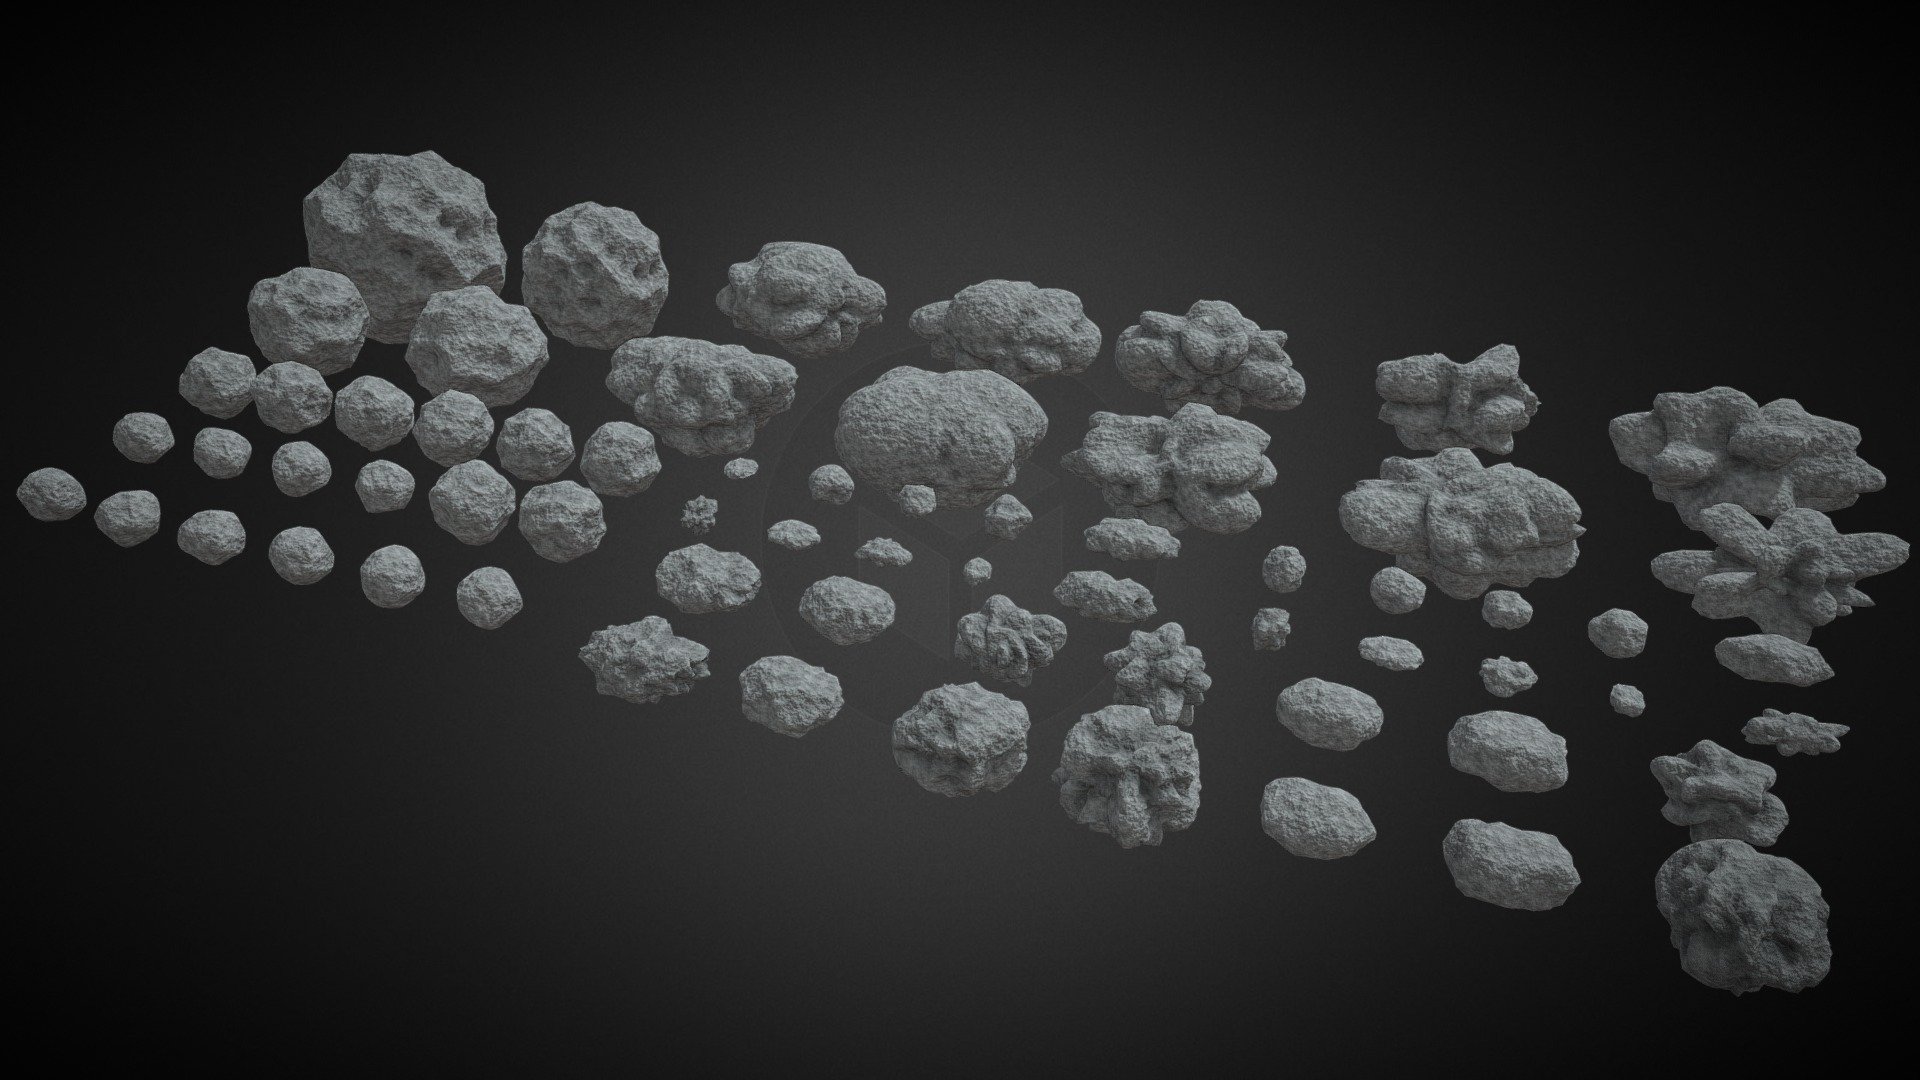 I made these 66 asteroids a while ago, but completely forgot to upload them

The obj, fbx, and stl files are in the additional file (1k, 2k, and 4k textures included)

Formats: BLEND, OBJ, FBX, STL

Modeled &amp; Textured by MOJackal

Collection link: https://skfb.ly/oxFEC

Larger resolution can be rendered if wished, though you can do that yourself with the .blend file as well

 - x66 Asteroids - Buy Royalty Free 3D model by MOJackal 3d model